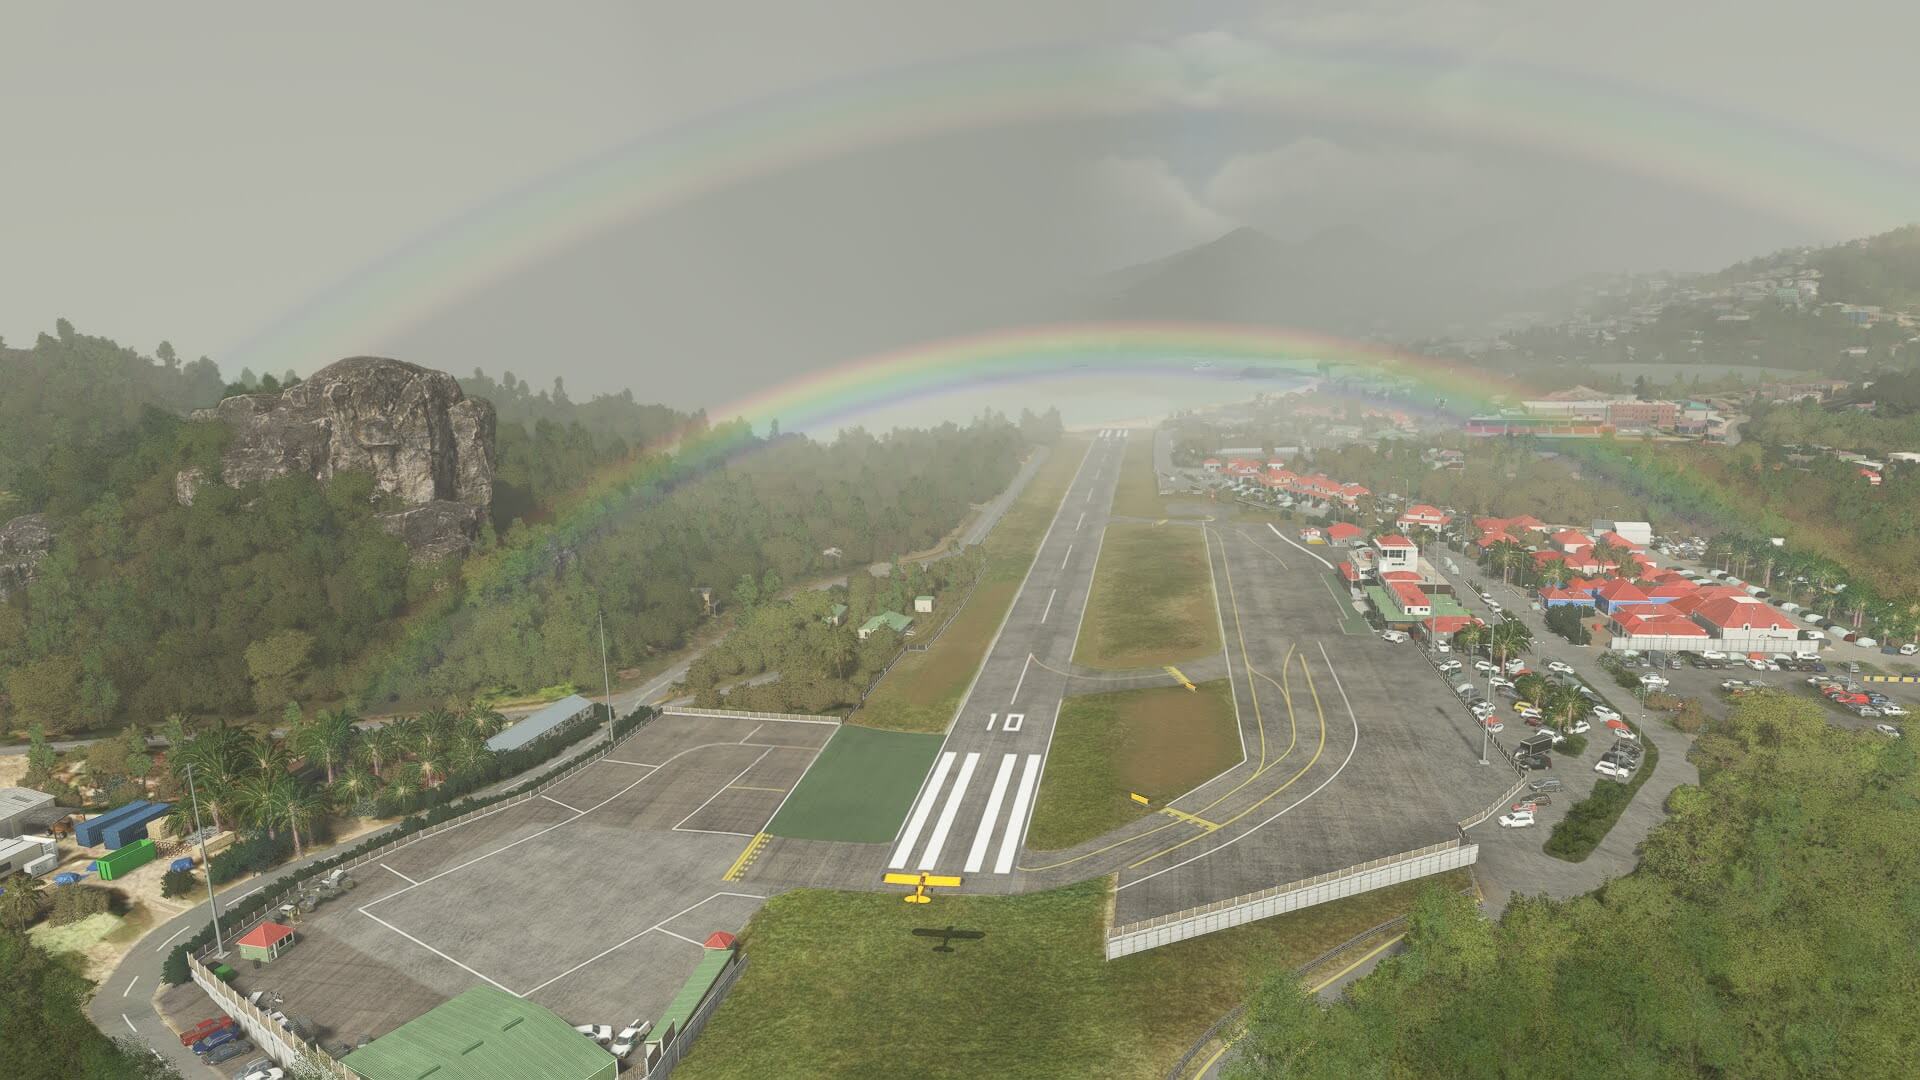 An Extra Cub flies over the threshold at St. Baarts, with a double rainbow above the airport.